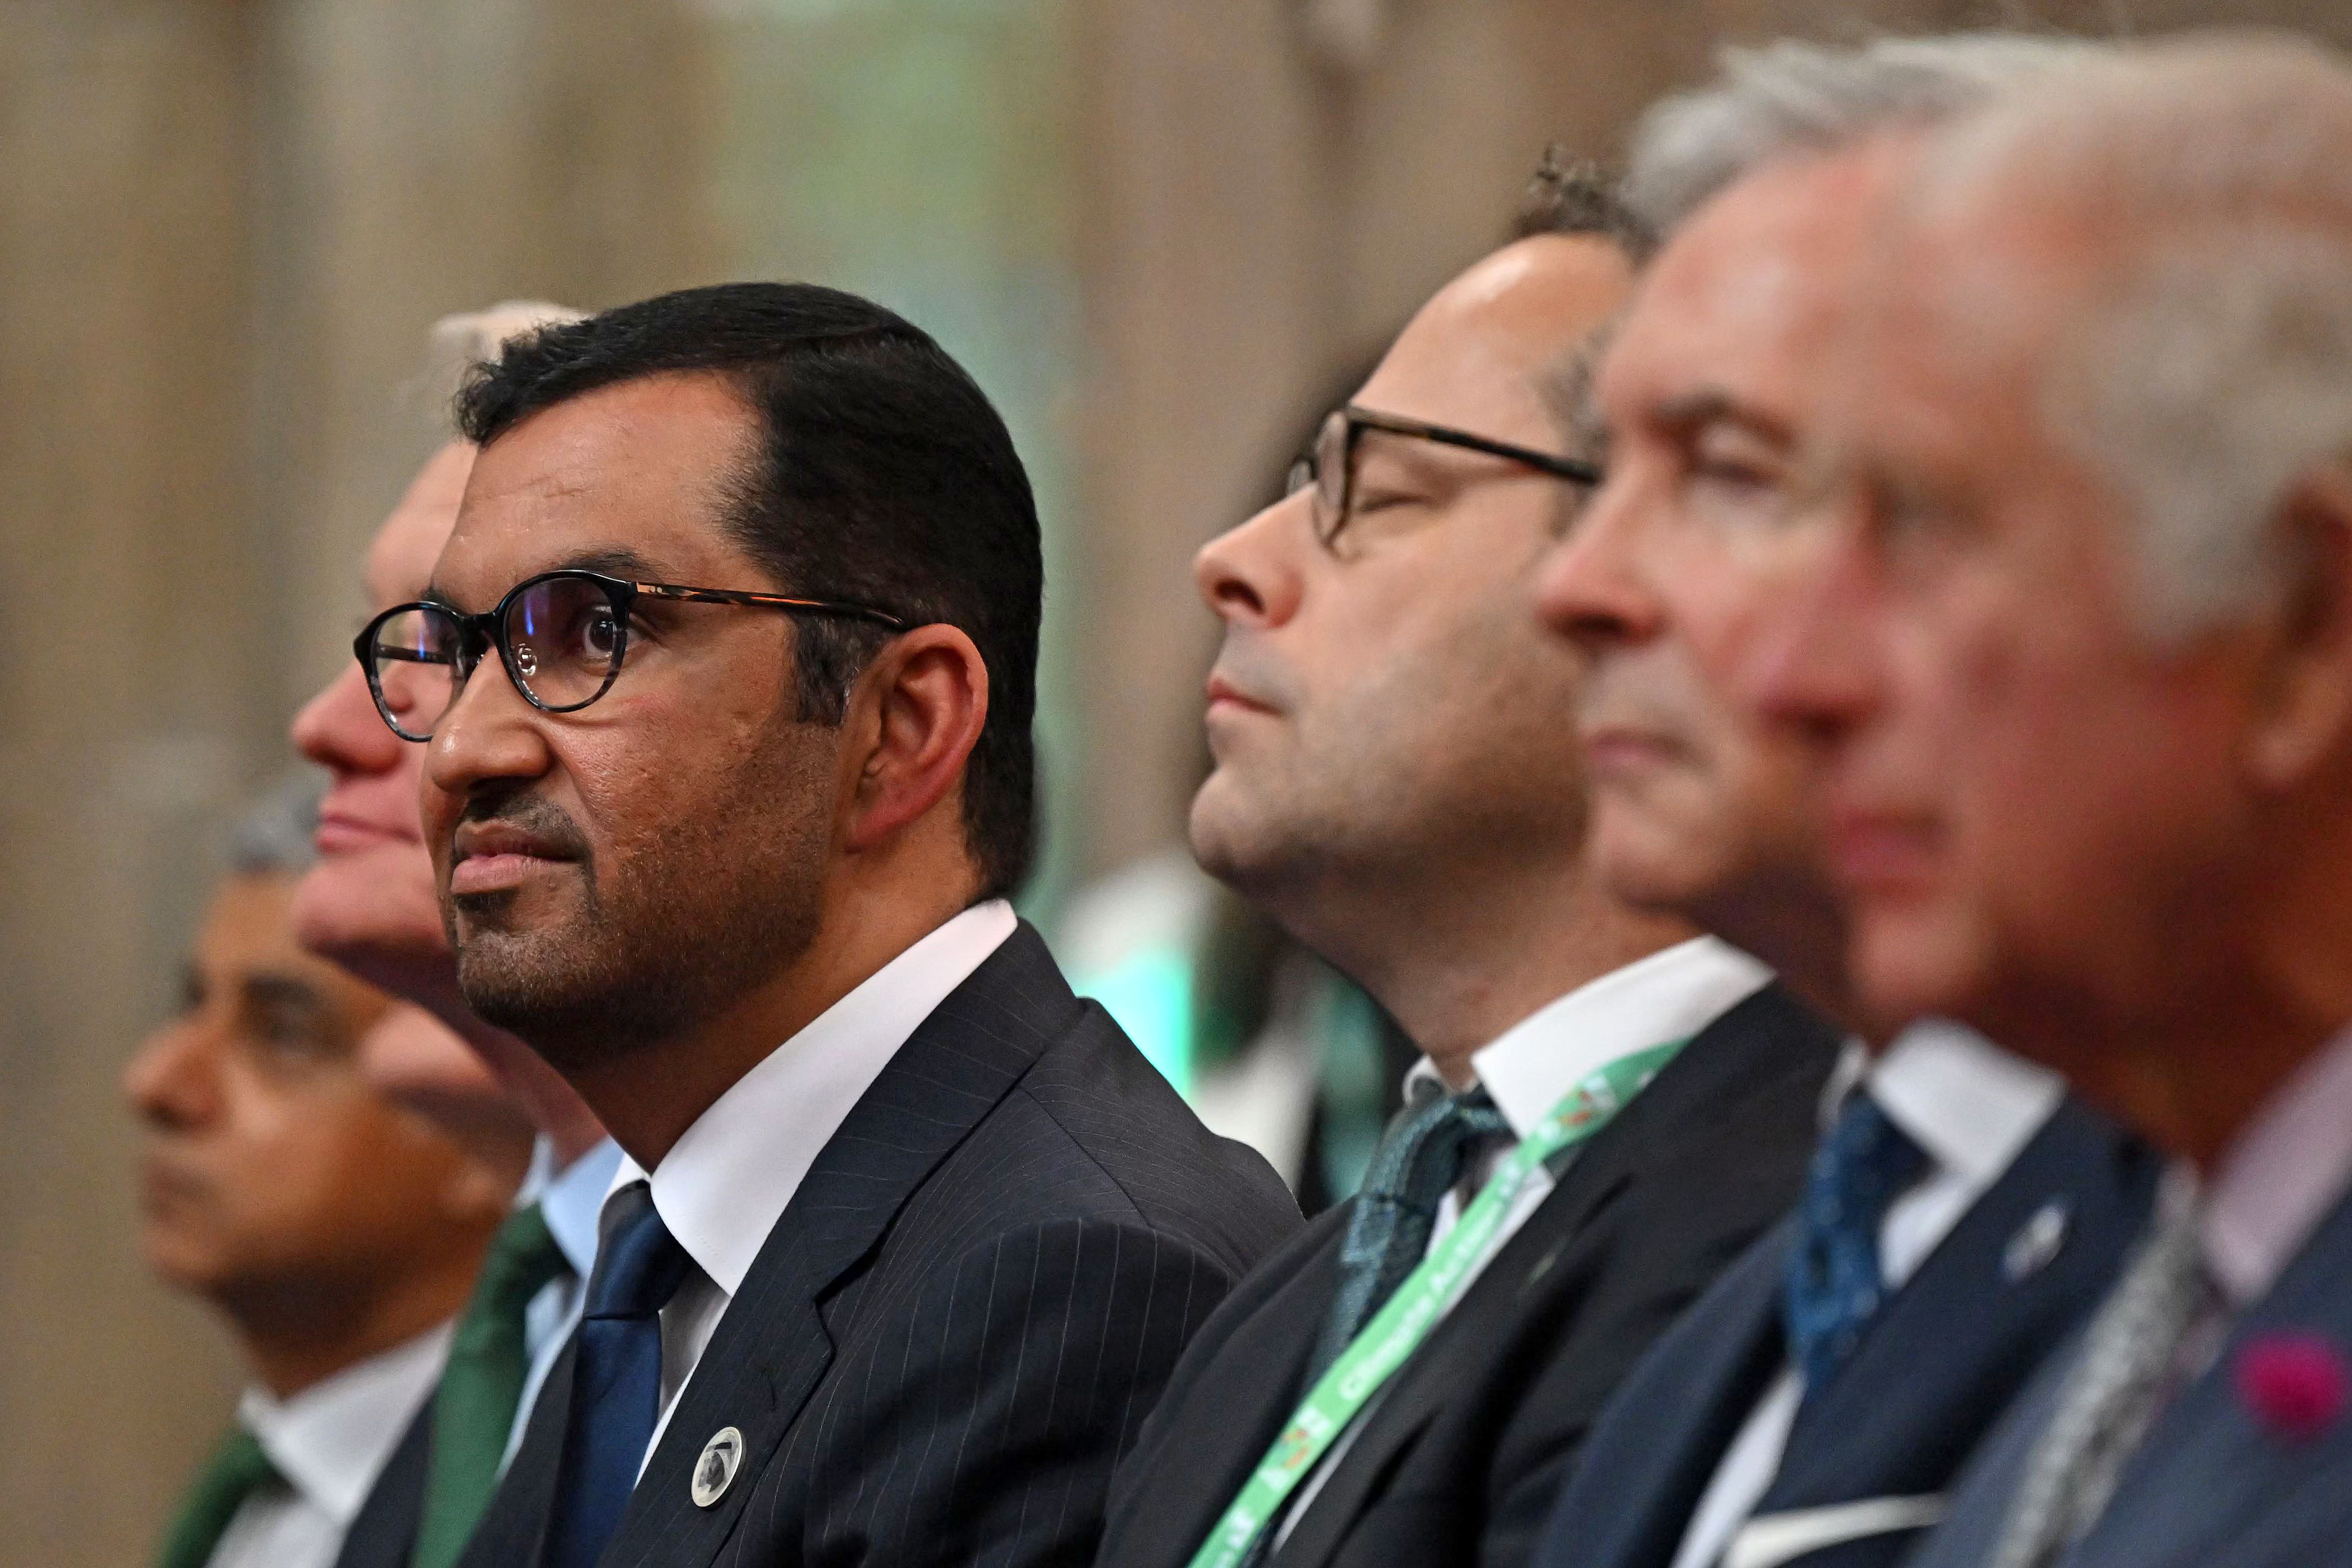 More than 130 members of Congress and the European Parliament are demanding the removal of Dr Sultan Al Jaber, the UAE oil magnate leading the climate talks